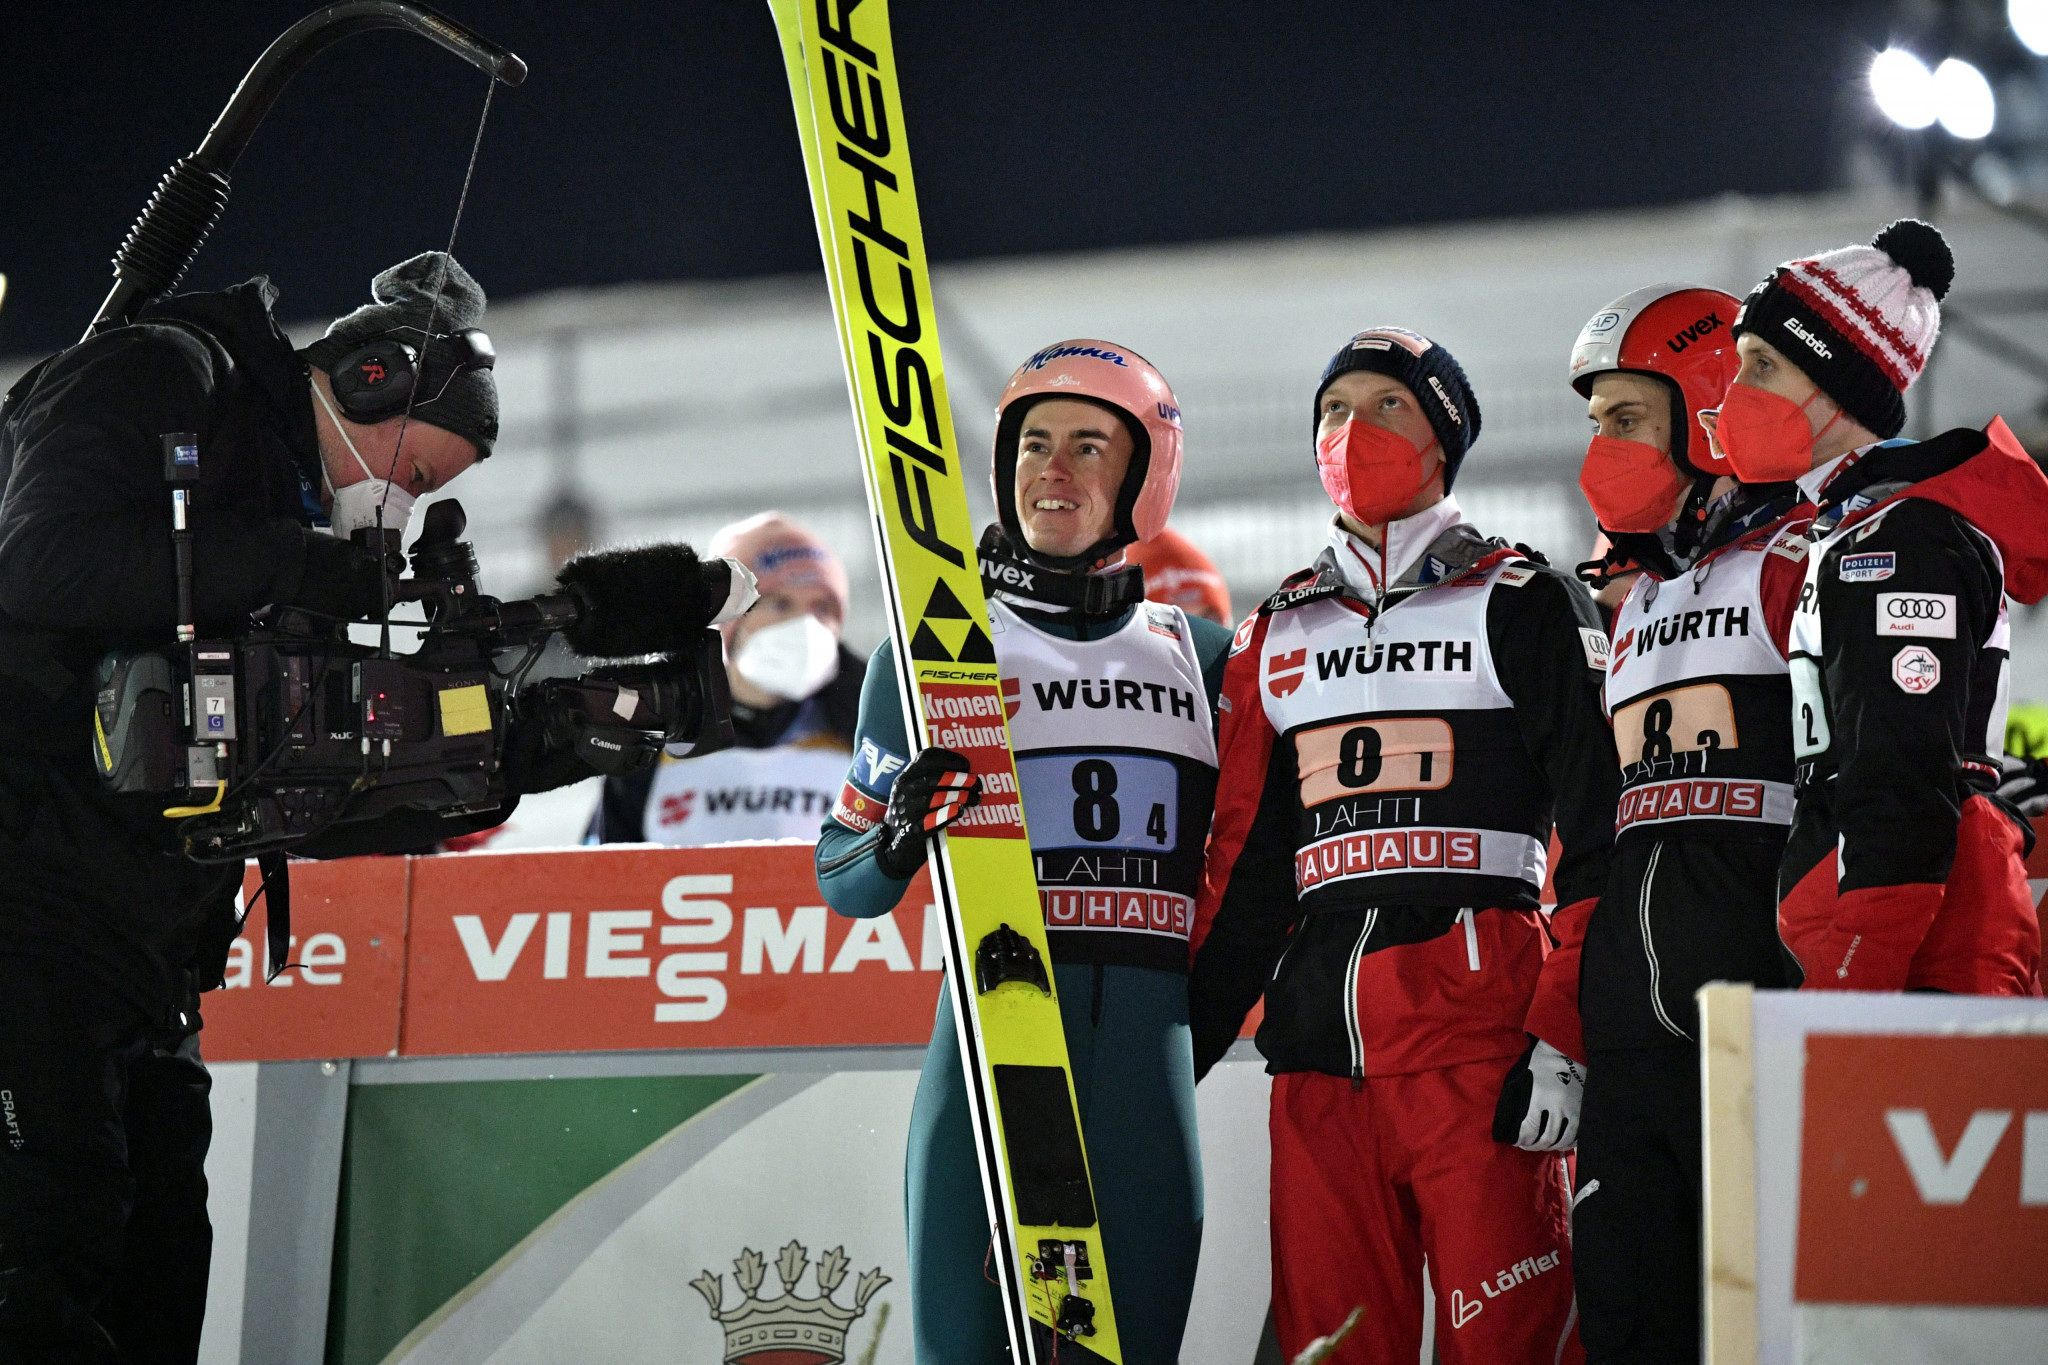 Olympic champions Austria win men's team event at Ski Jumping World Cup in Lahti